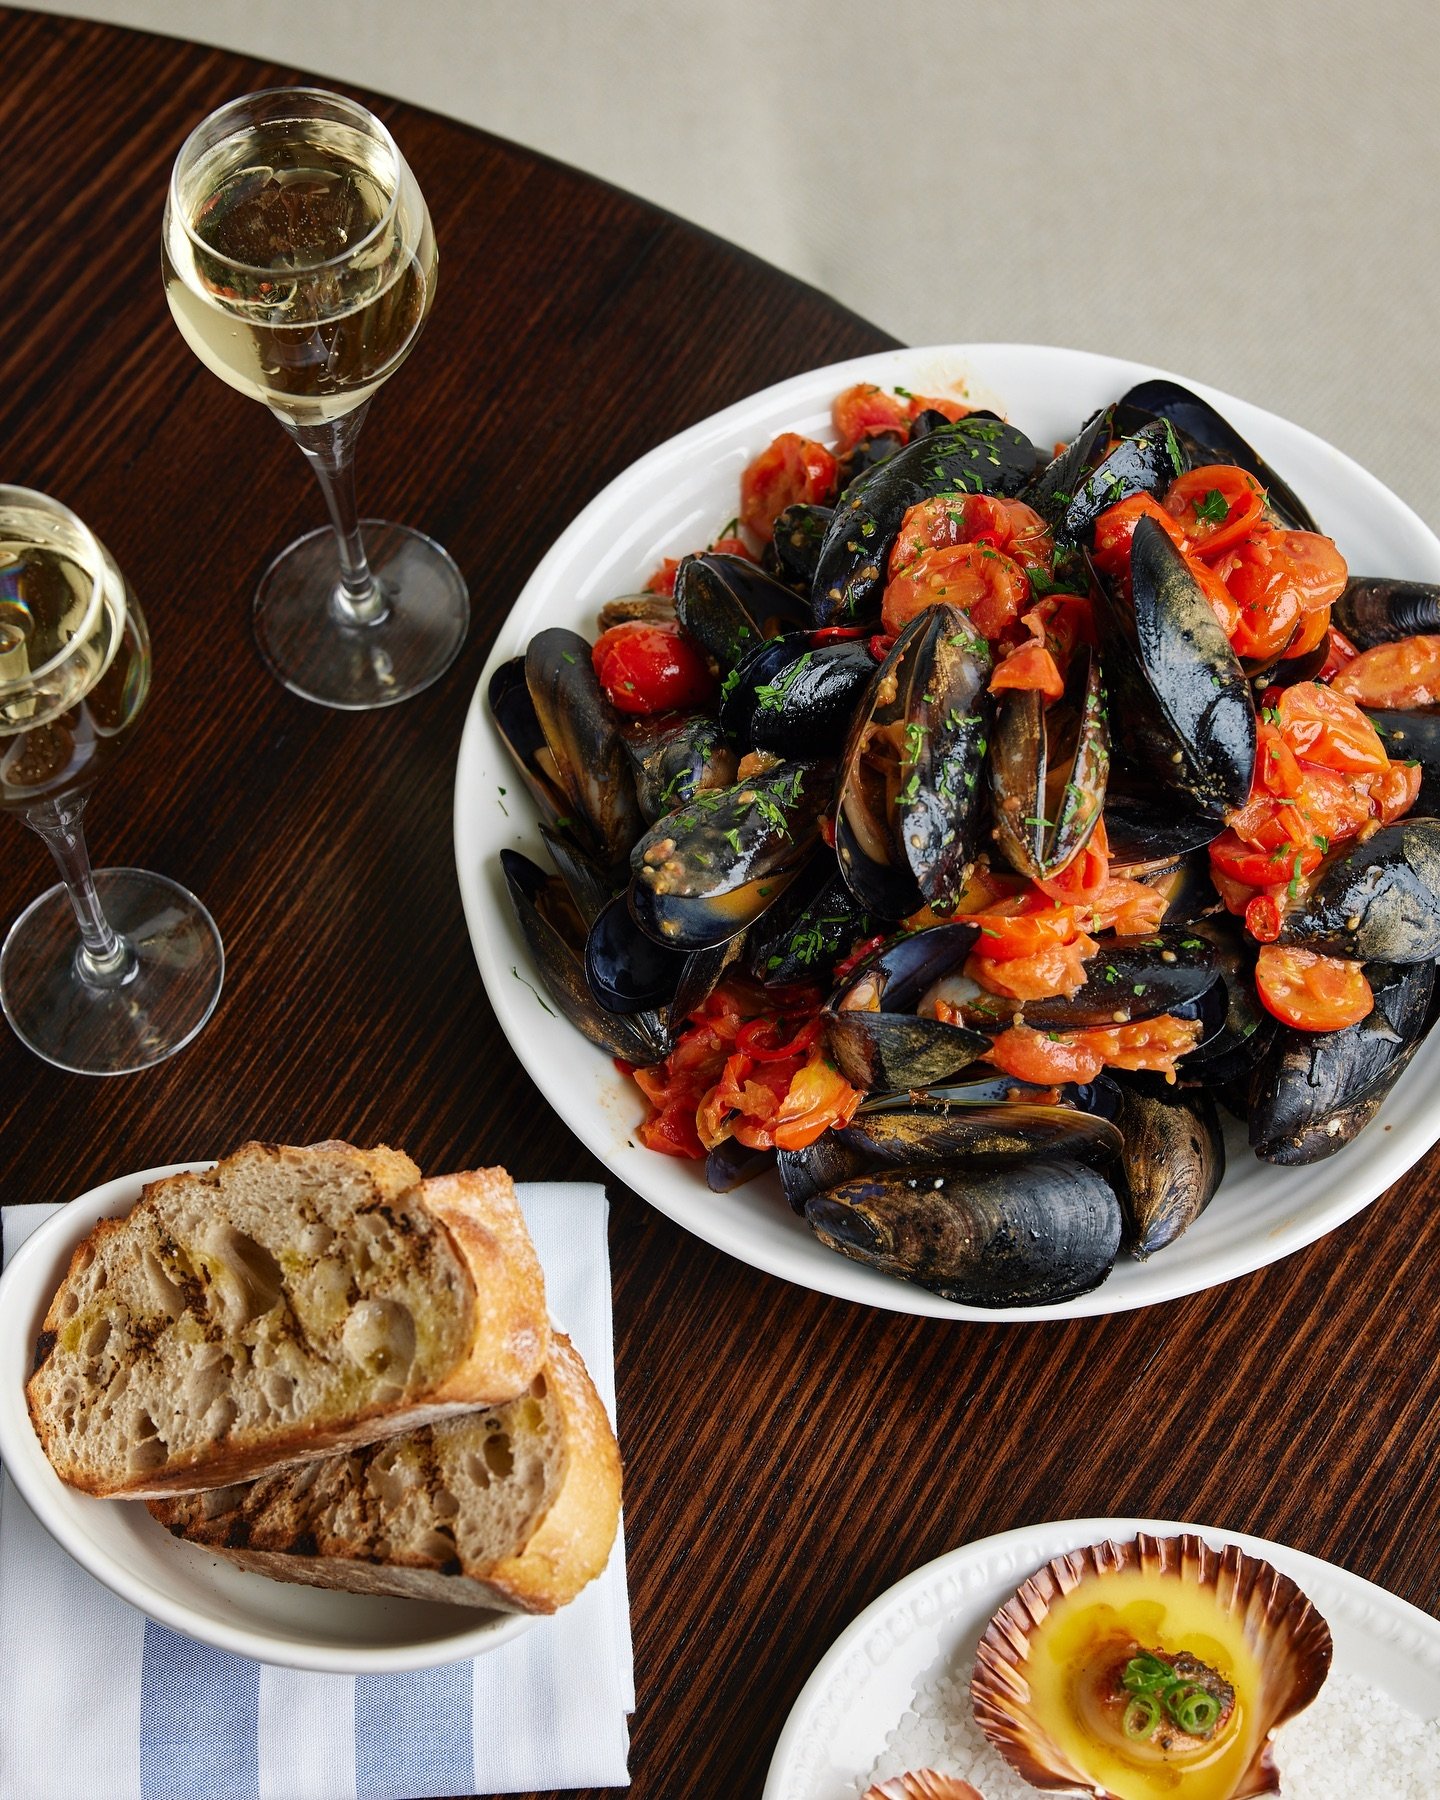 Get ready to mop up the delicious sauce from our bowl of mussels. Prepared with white wine, garlic, confit tomato and parsley and served with crispy bread.

www.foshportside.com.au/bookings for reservations or call us on (07) 3211 8111
Portside Wharf